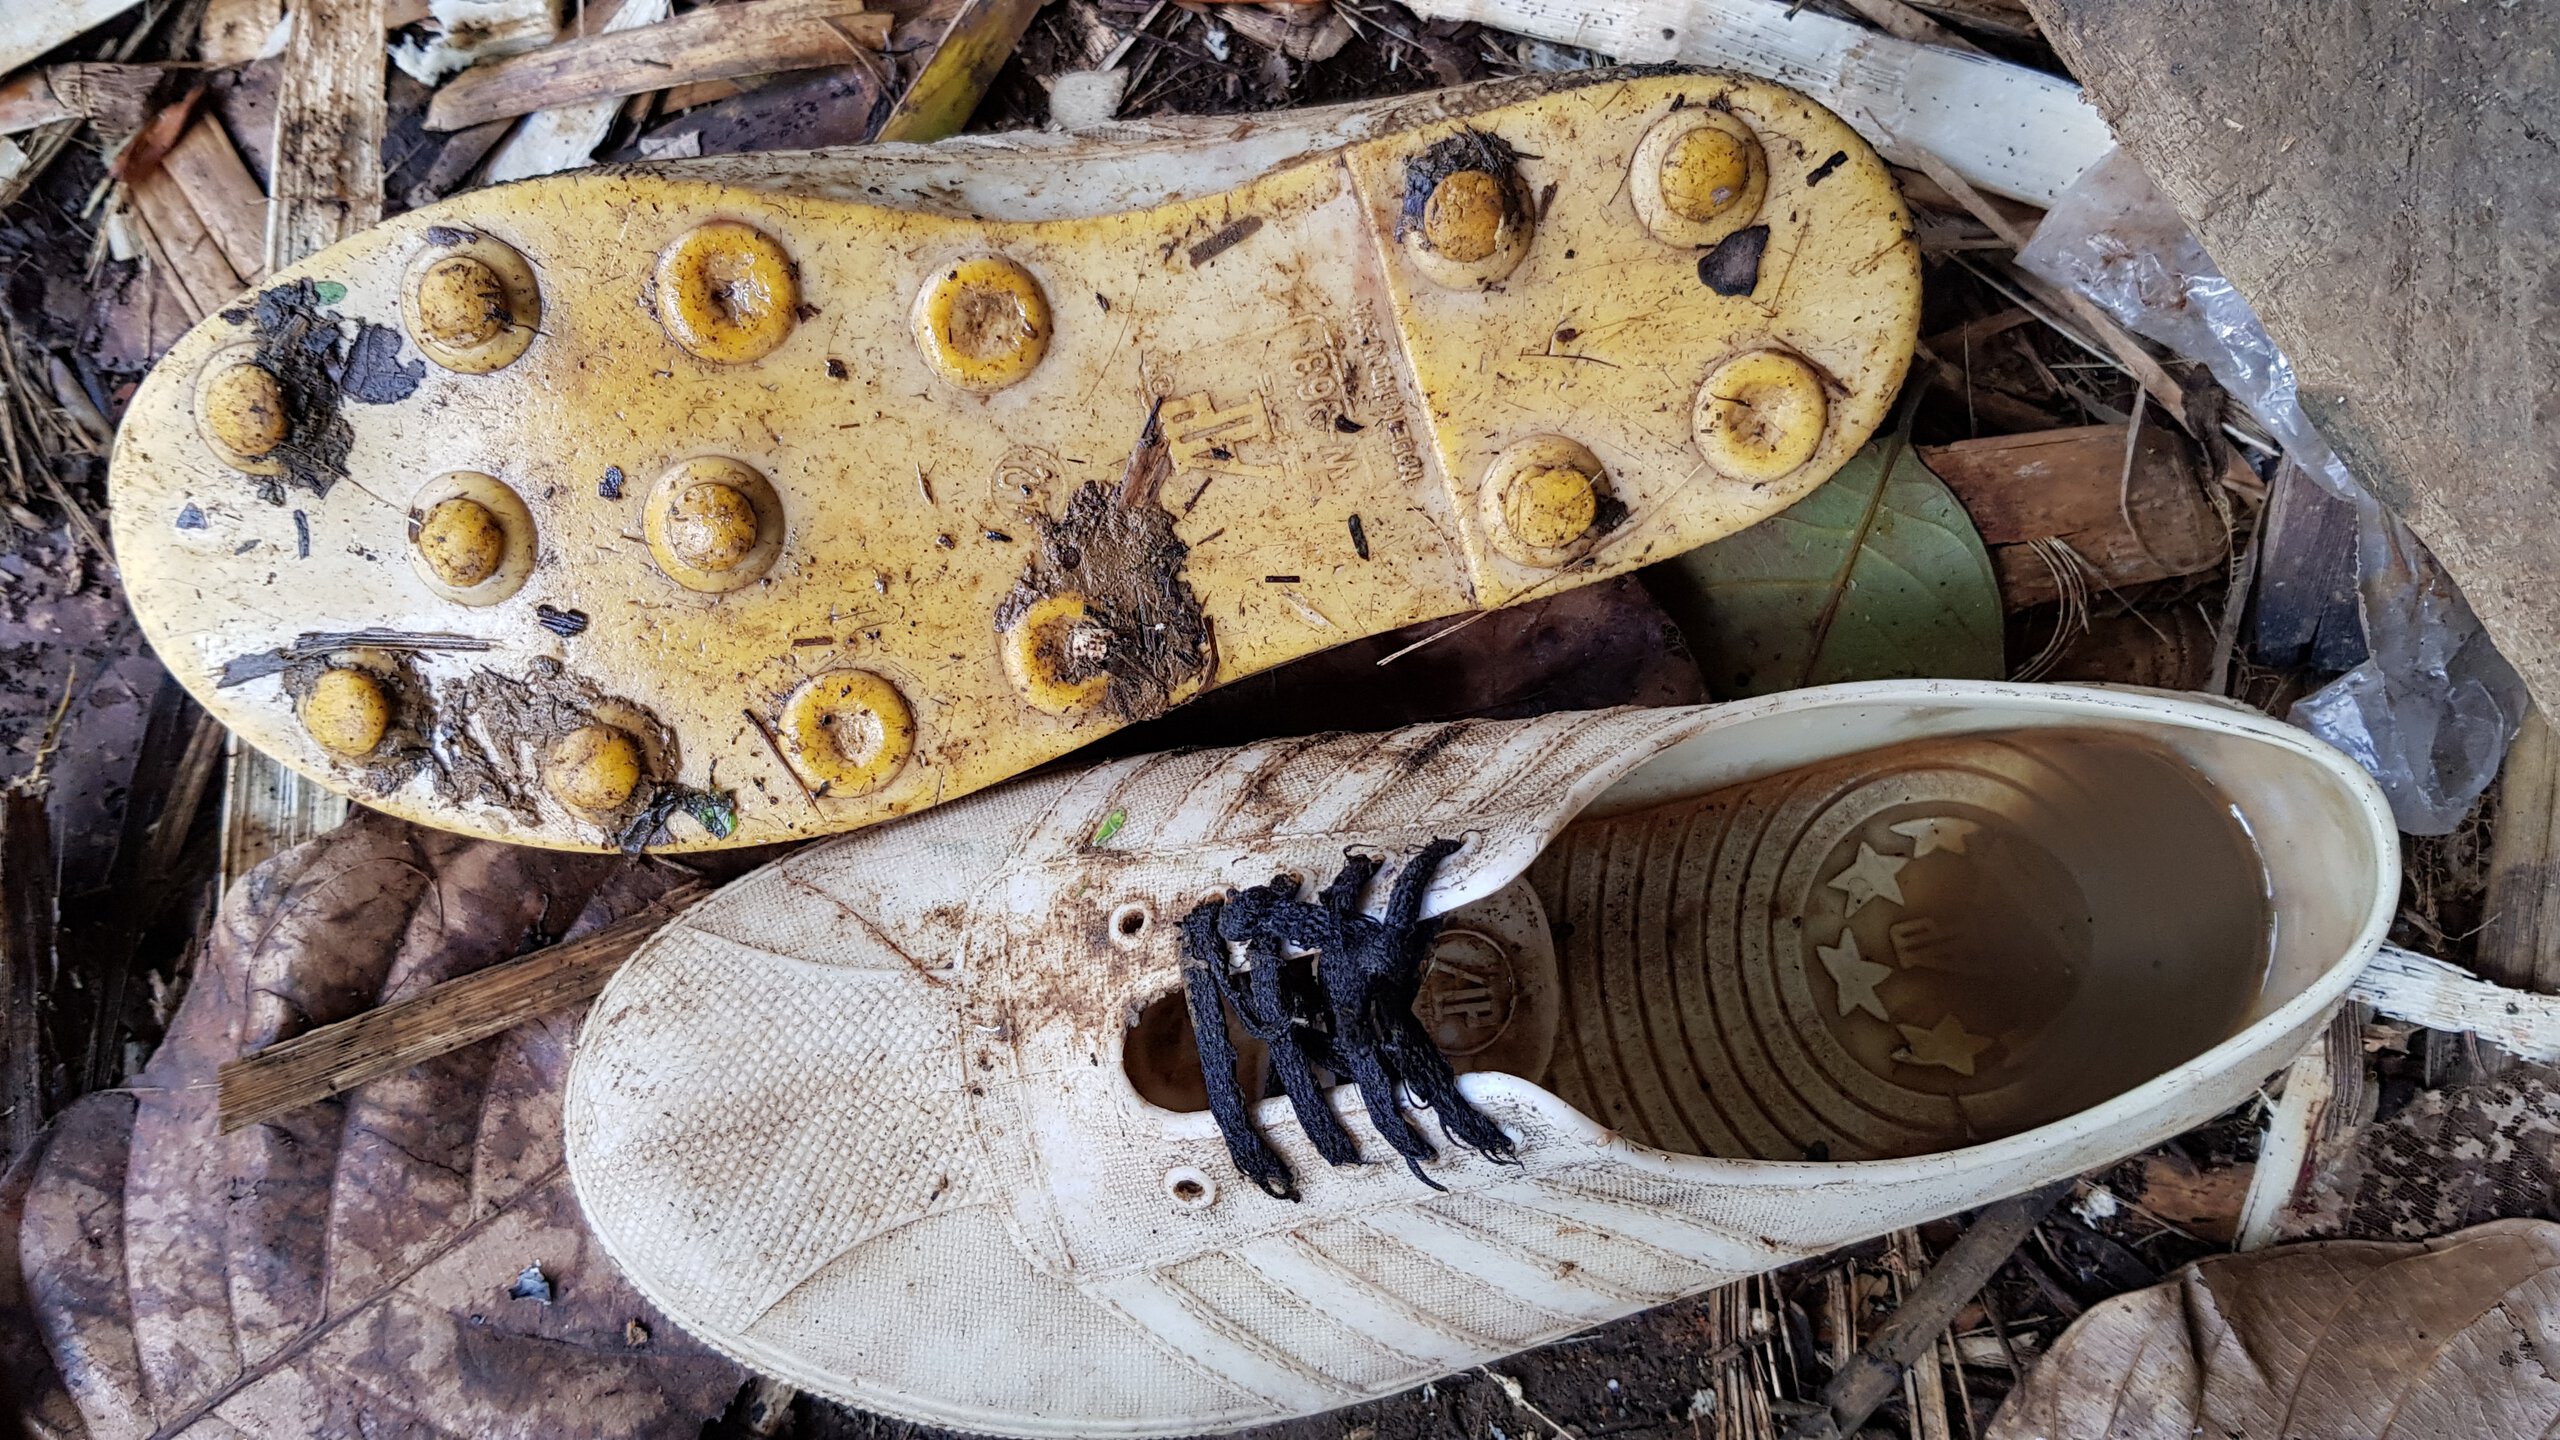 The best footwear for a jungle trip, if your size is available. The sole pattern is not as dense as that of typical hiking shoes, so clay do not stick as firmly. Wading rivers and creeks for hours is not a problem.